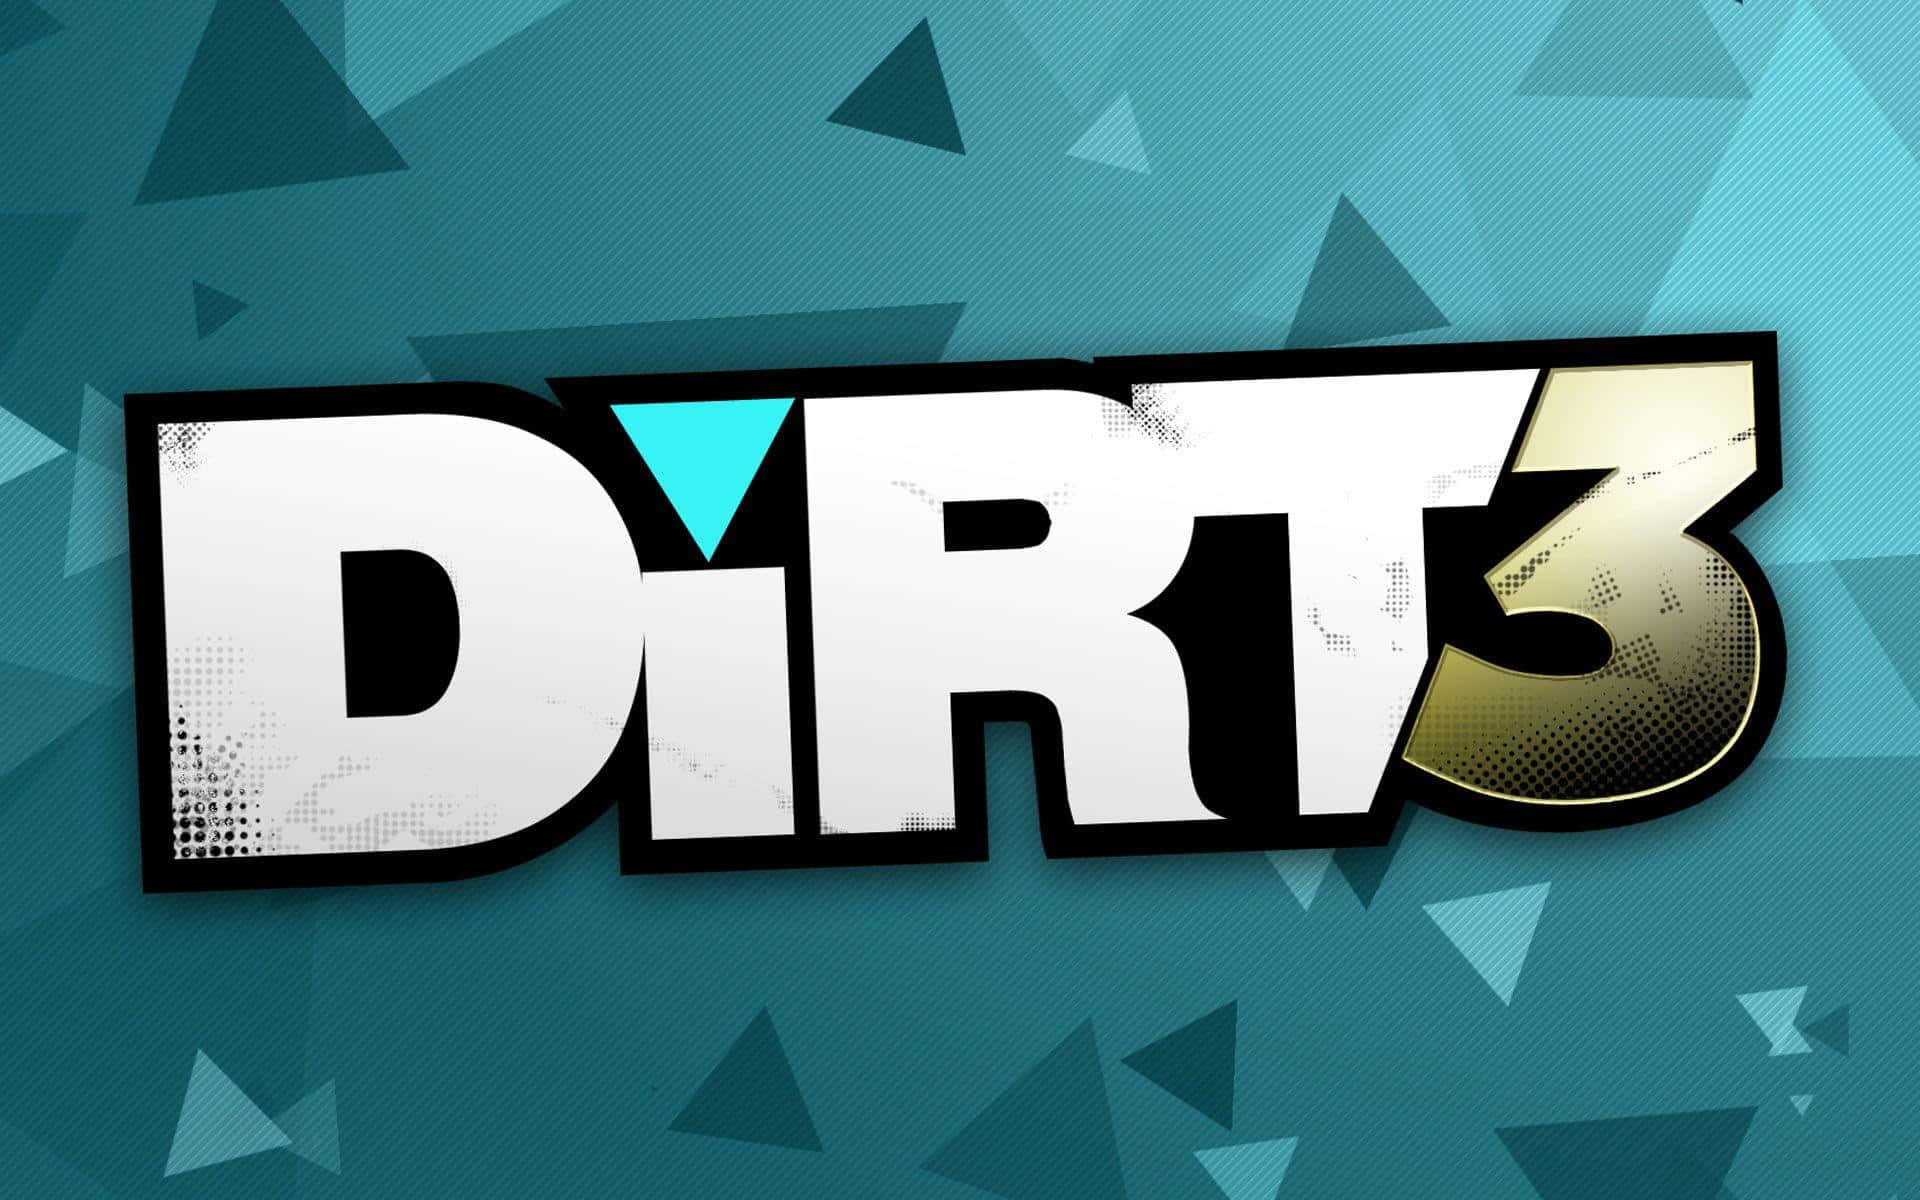 Dirt 3 not on steam фото 27